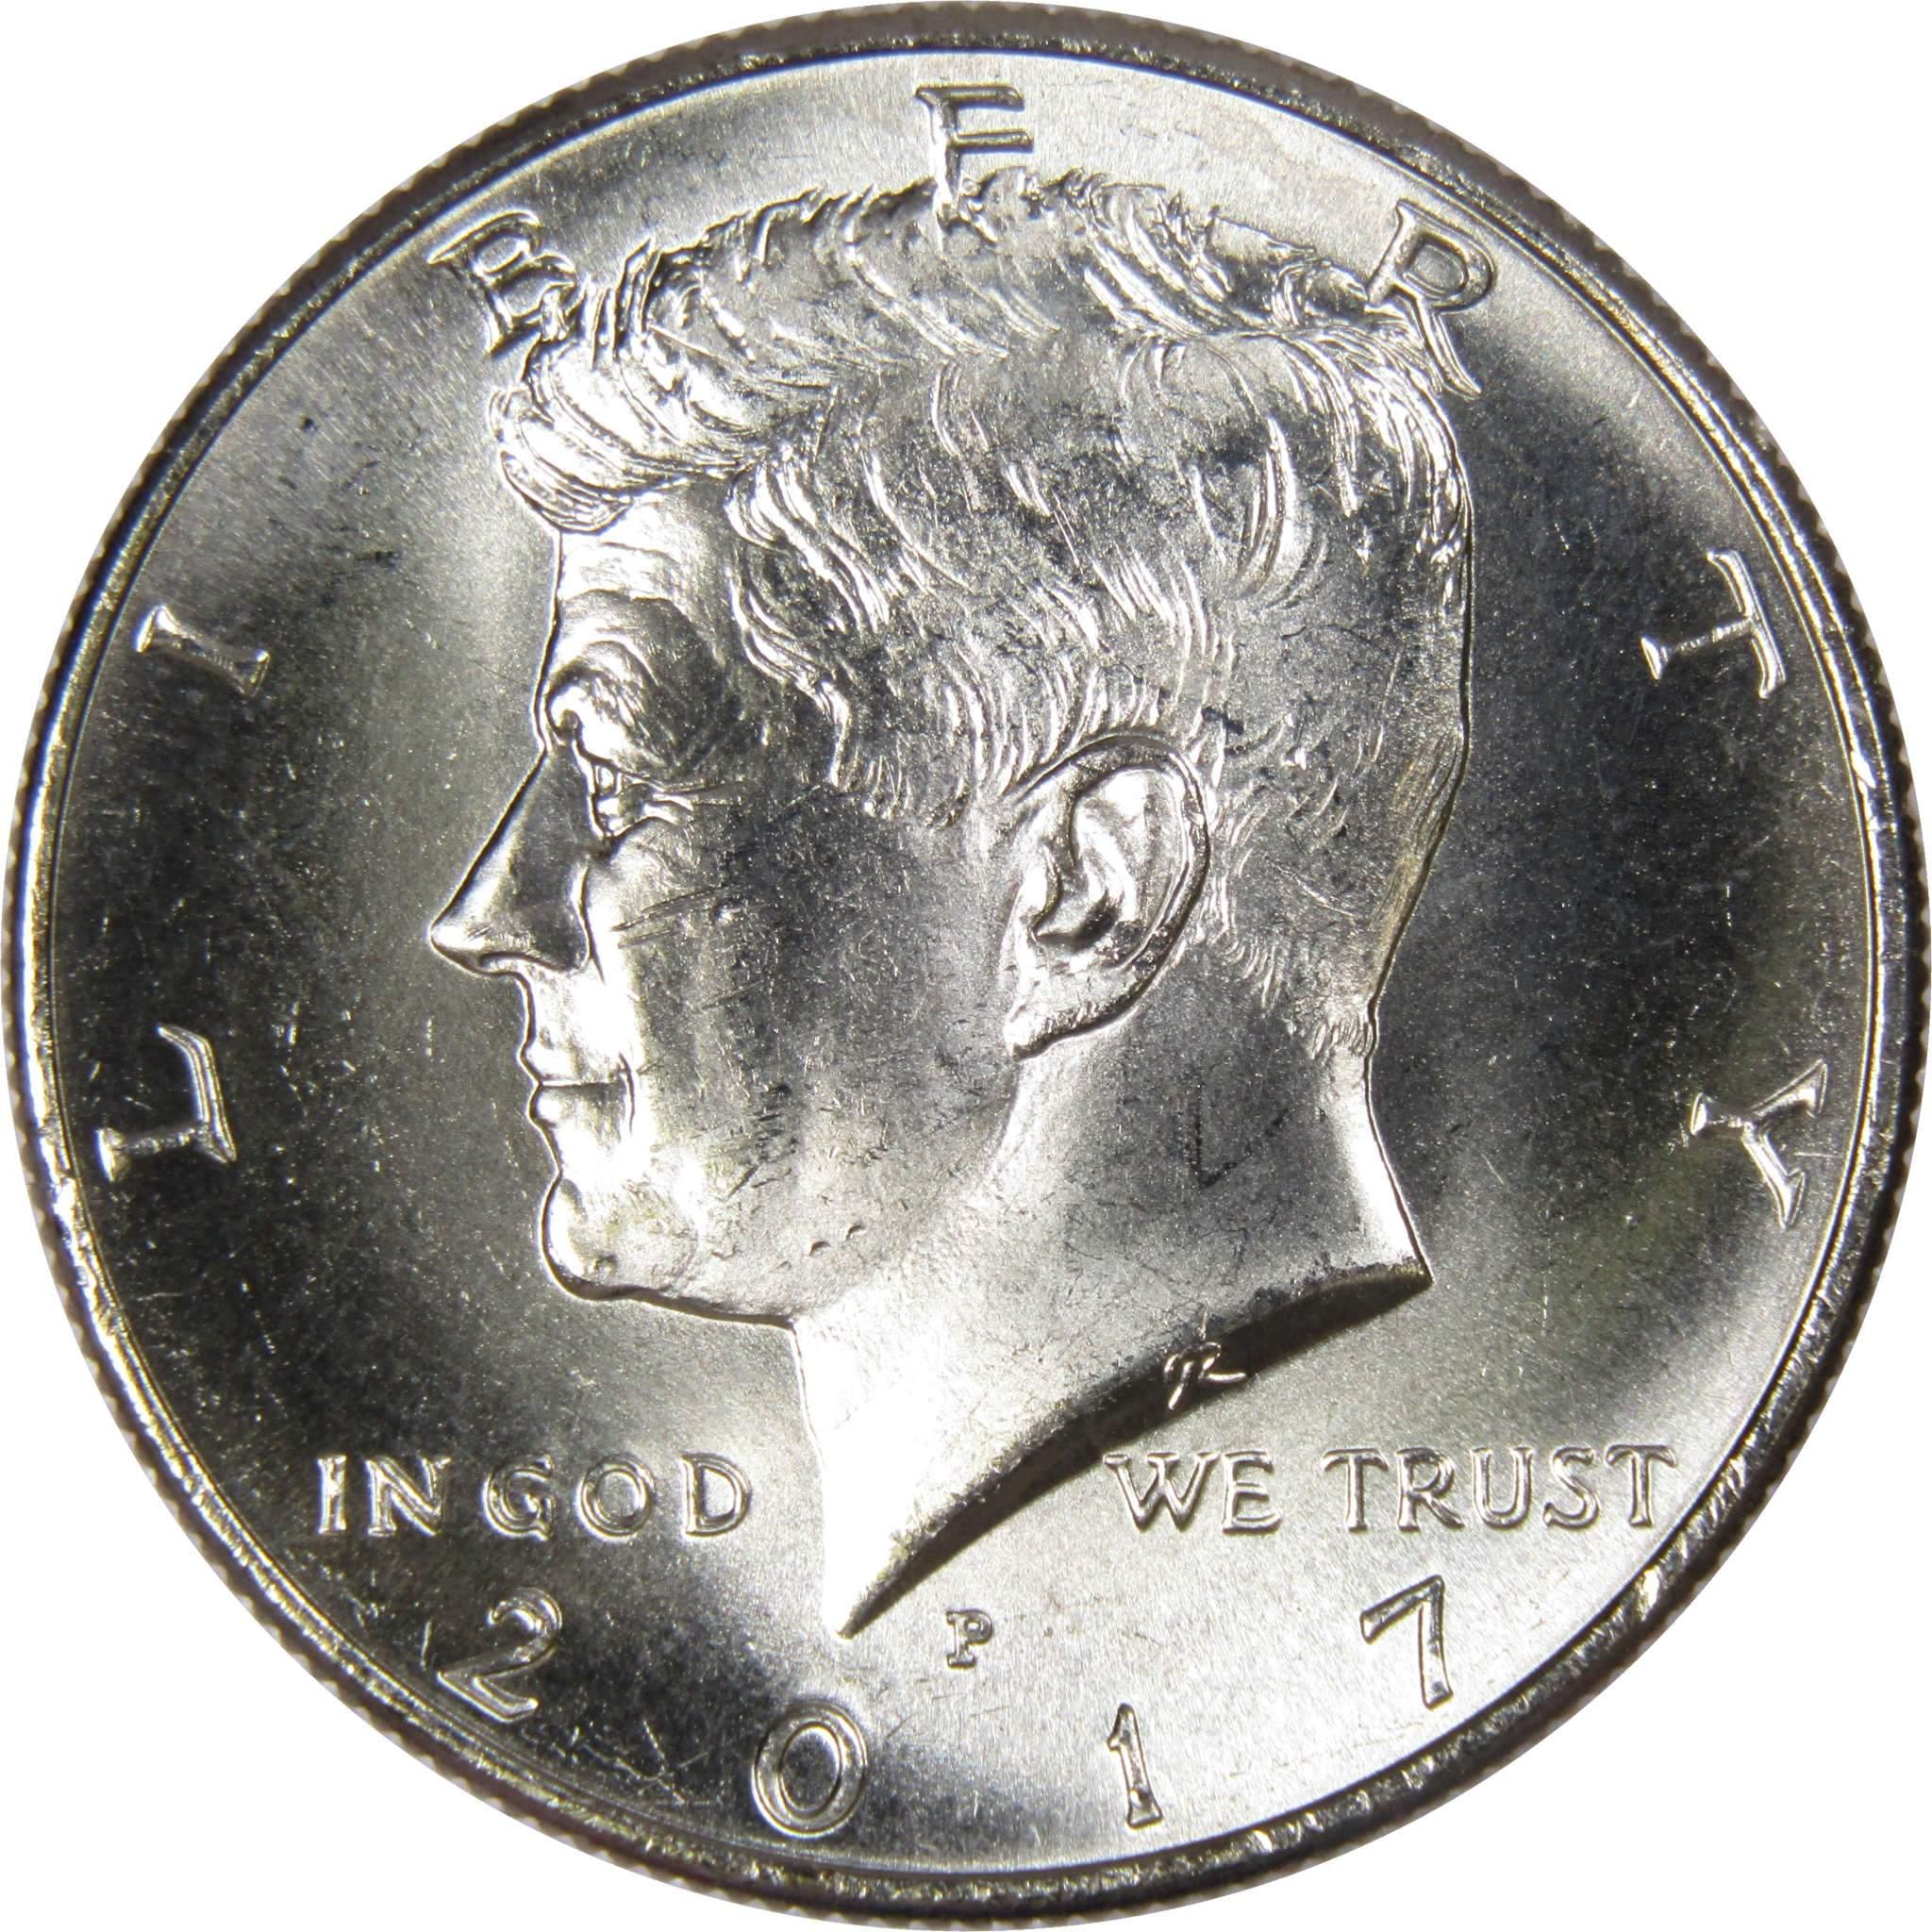 2017 P Kennedy Half Dollar BU Uncirculated Mint State 50c US Coin Collectible